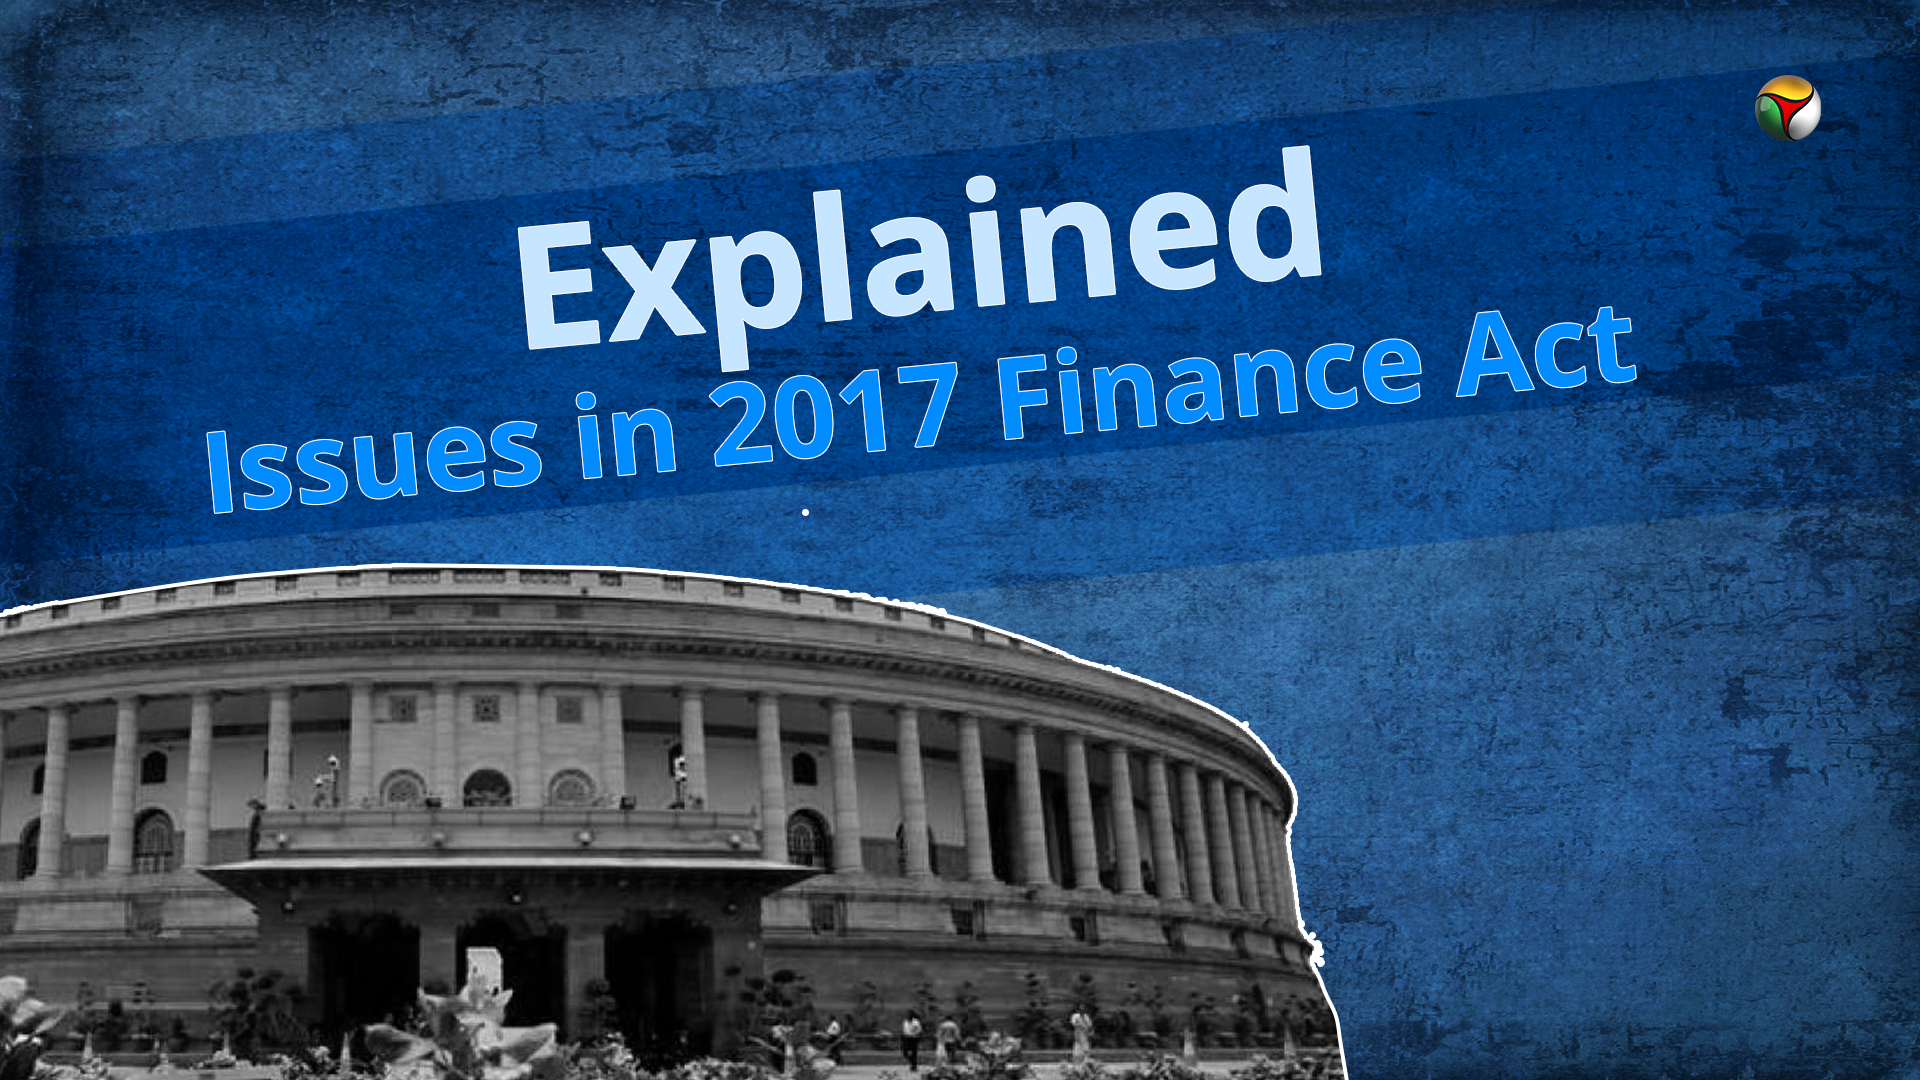 2017 Finance Act issues explained